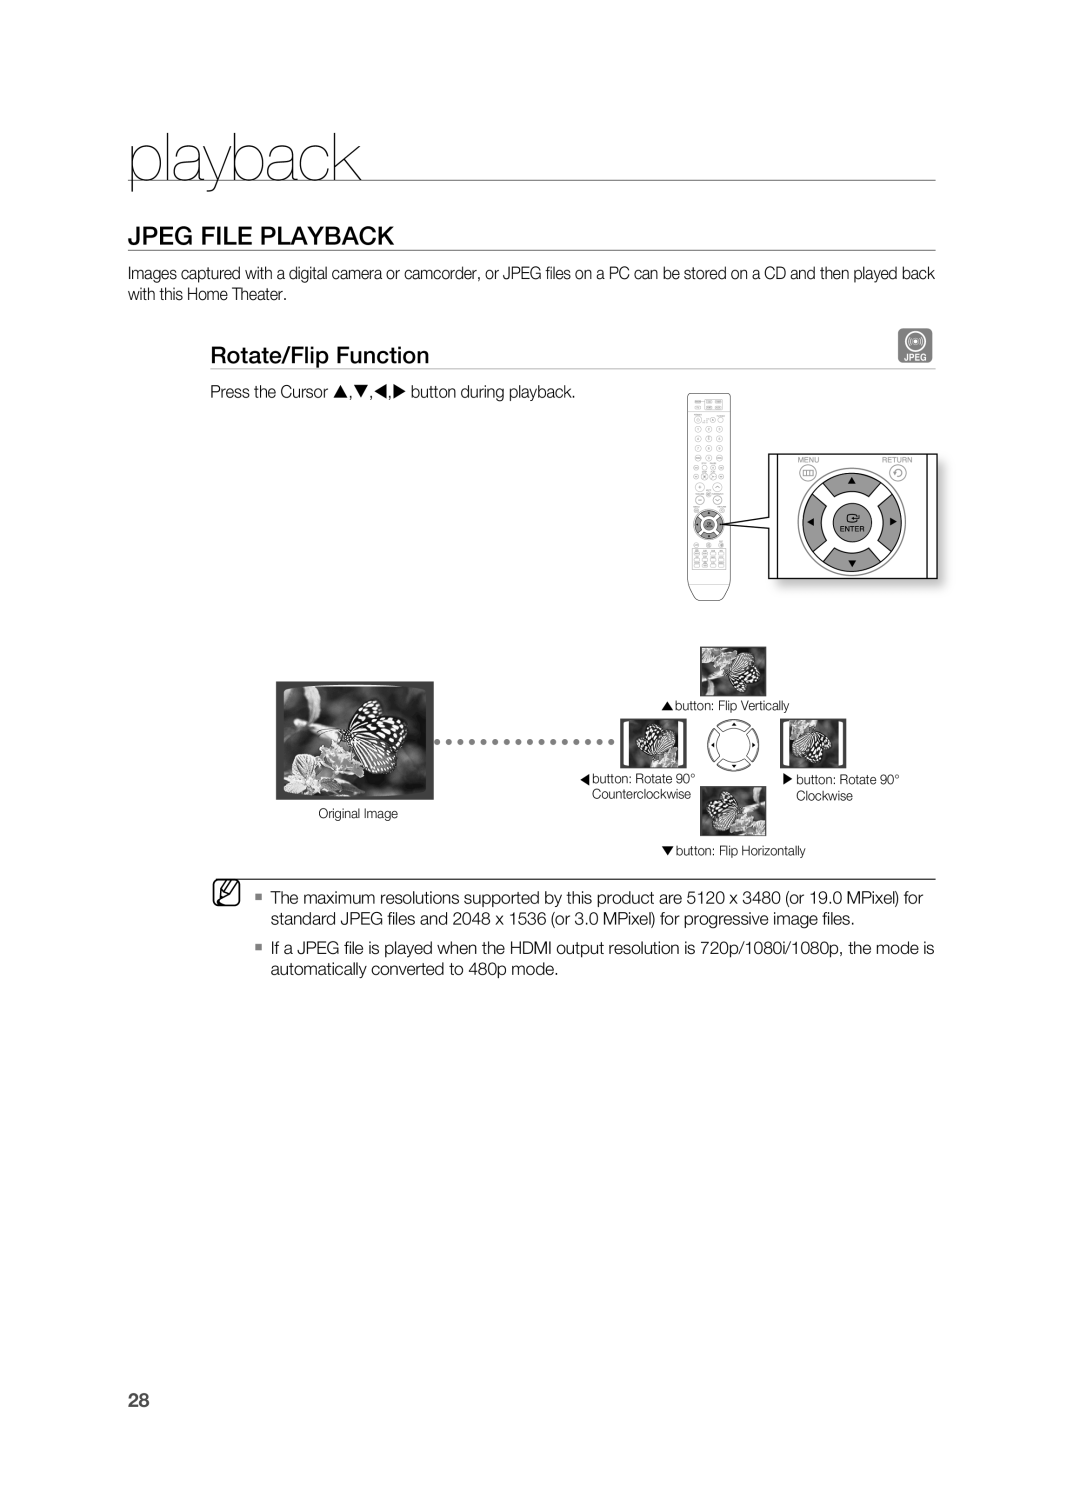 Sony HT-X810 user manual JPEG FIlE PlAYBACK, rotate/Flip Function, playback 